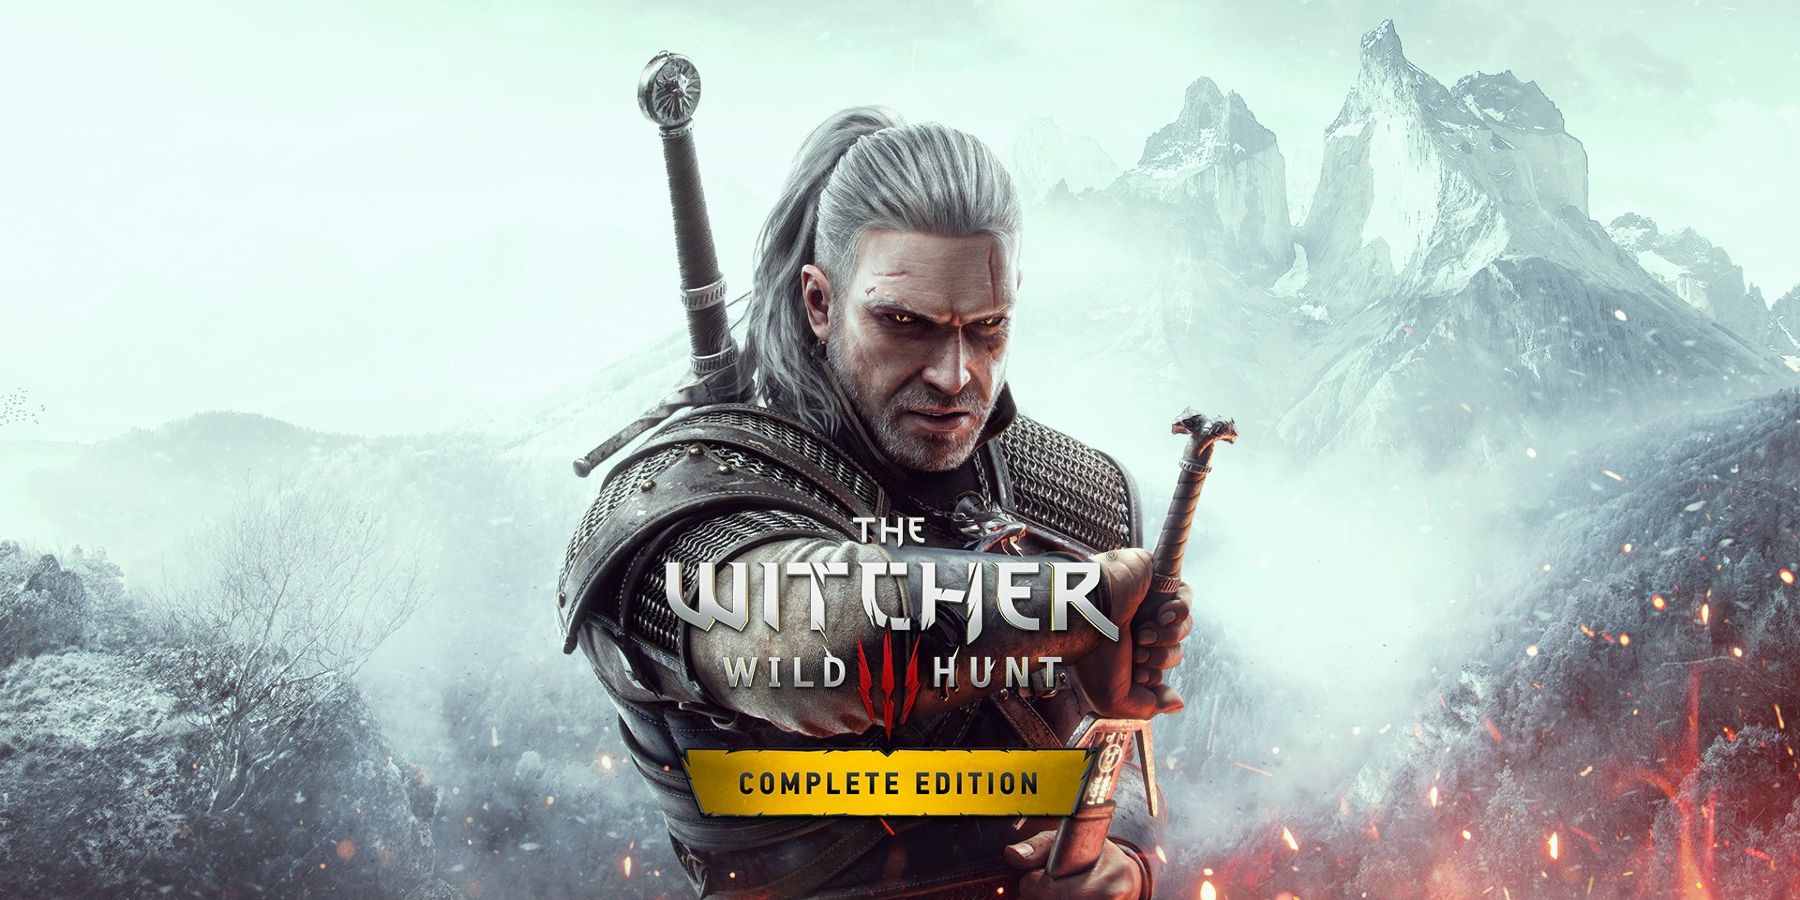 the witcher 3 complete edition